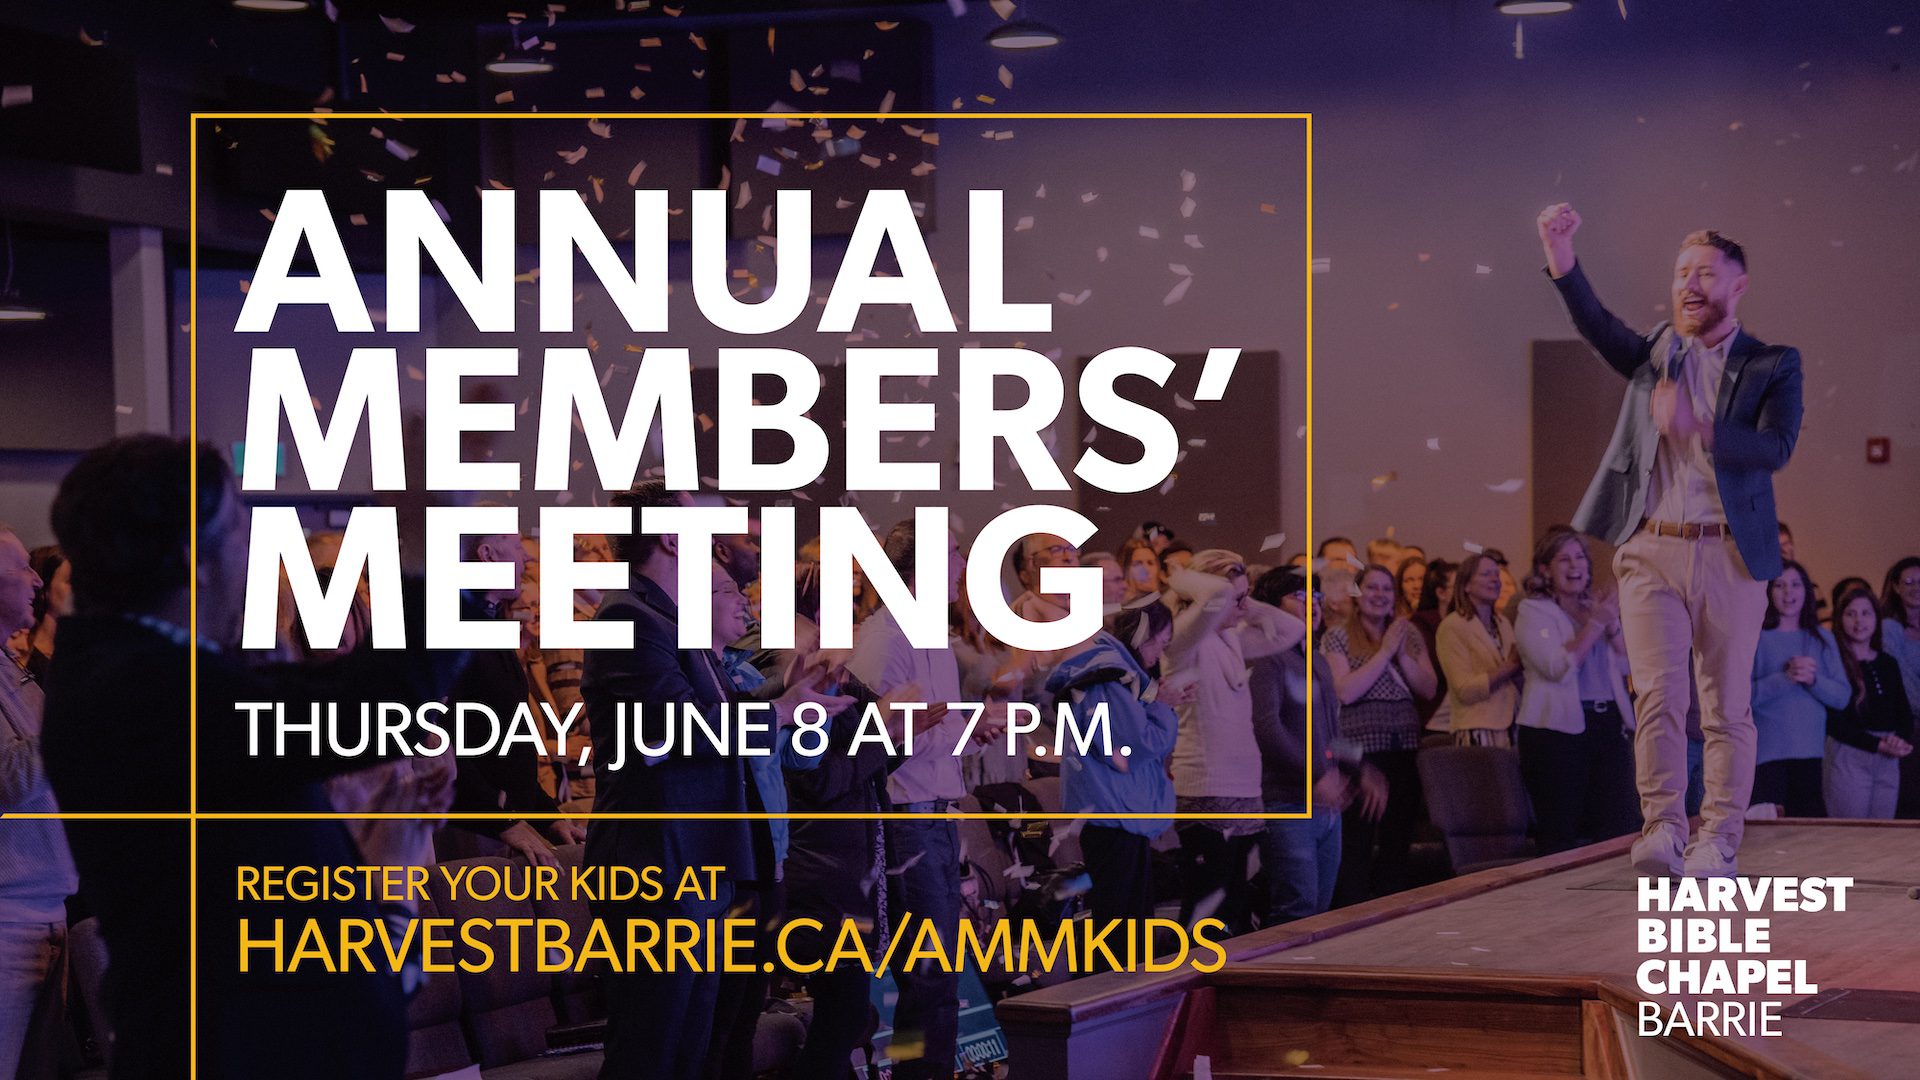 Annual Members' Meeting - Thursday June 8 at 7:00 p.m. - Register your kids at harvestbarrie.ca/ammkids